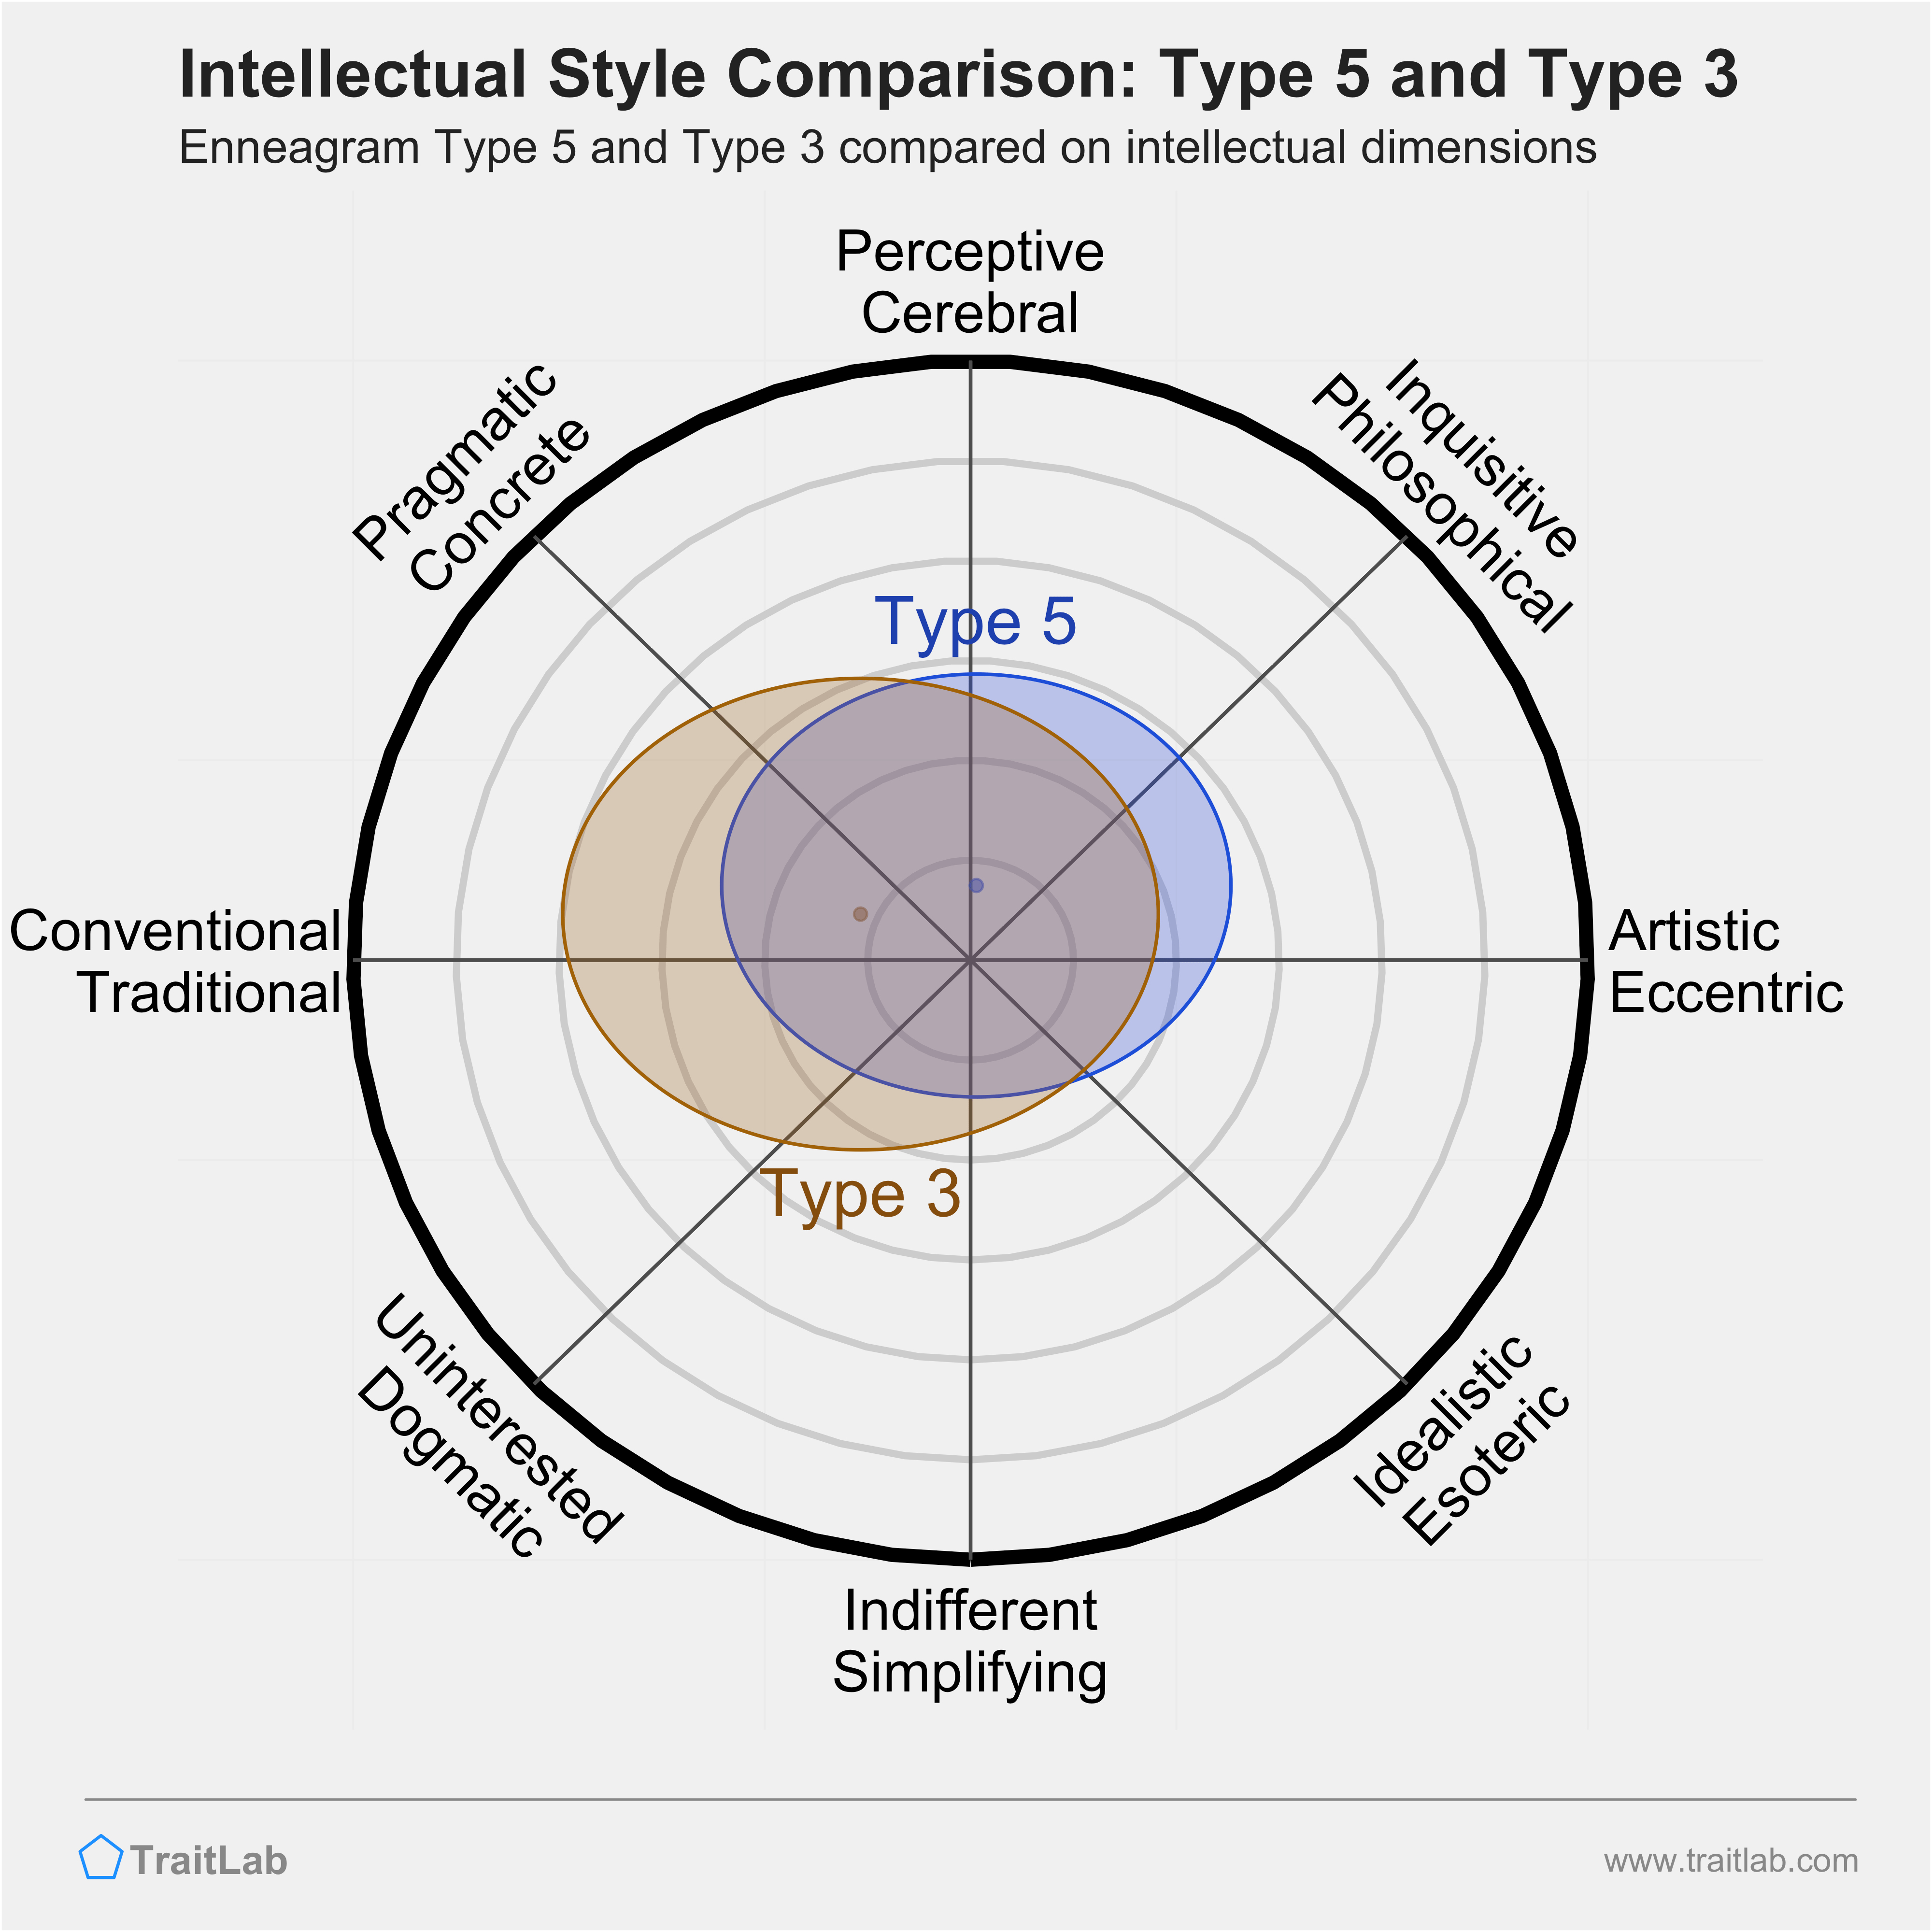 Type 5 and Type 3 comparison across intellectual dimensions